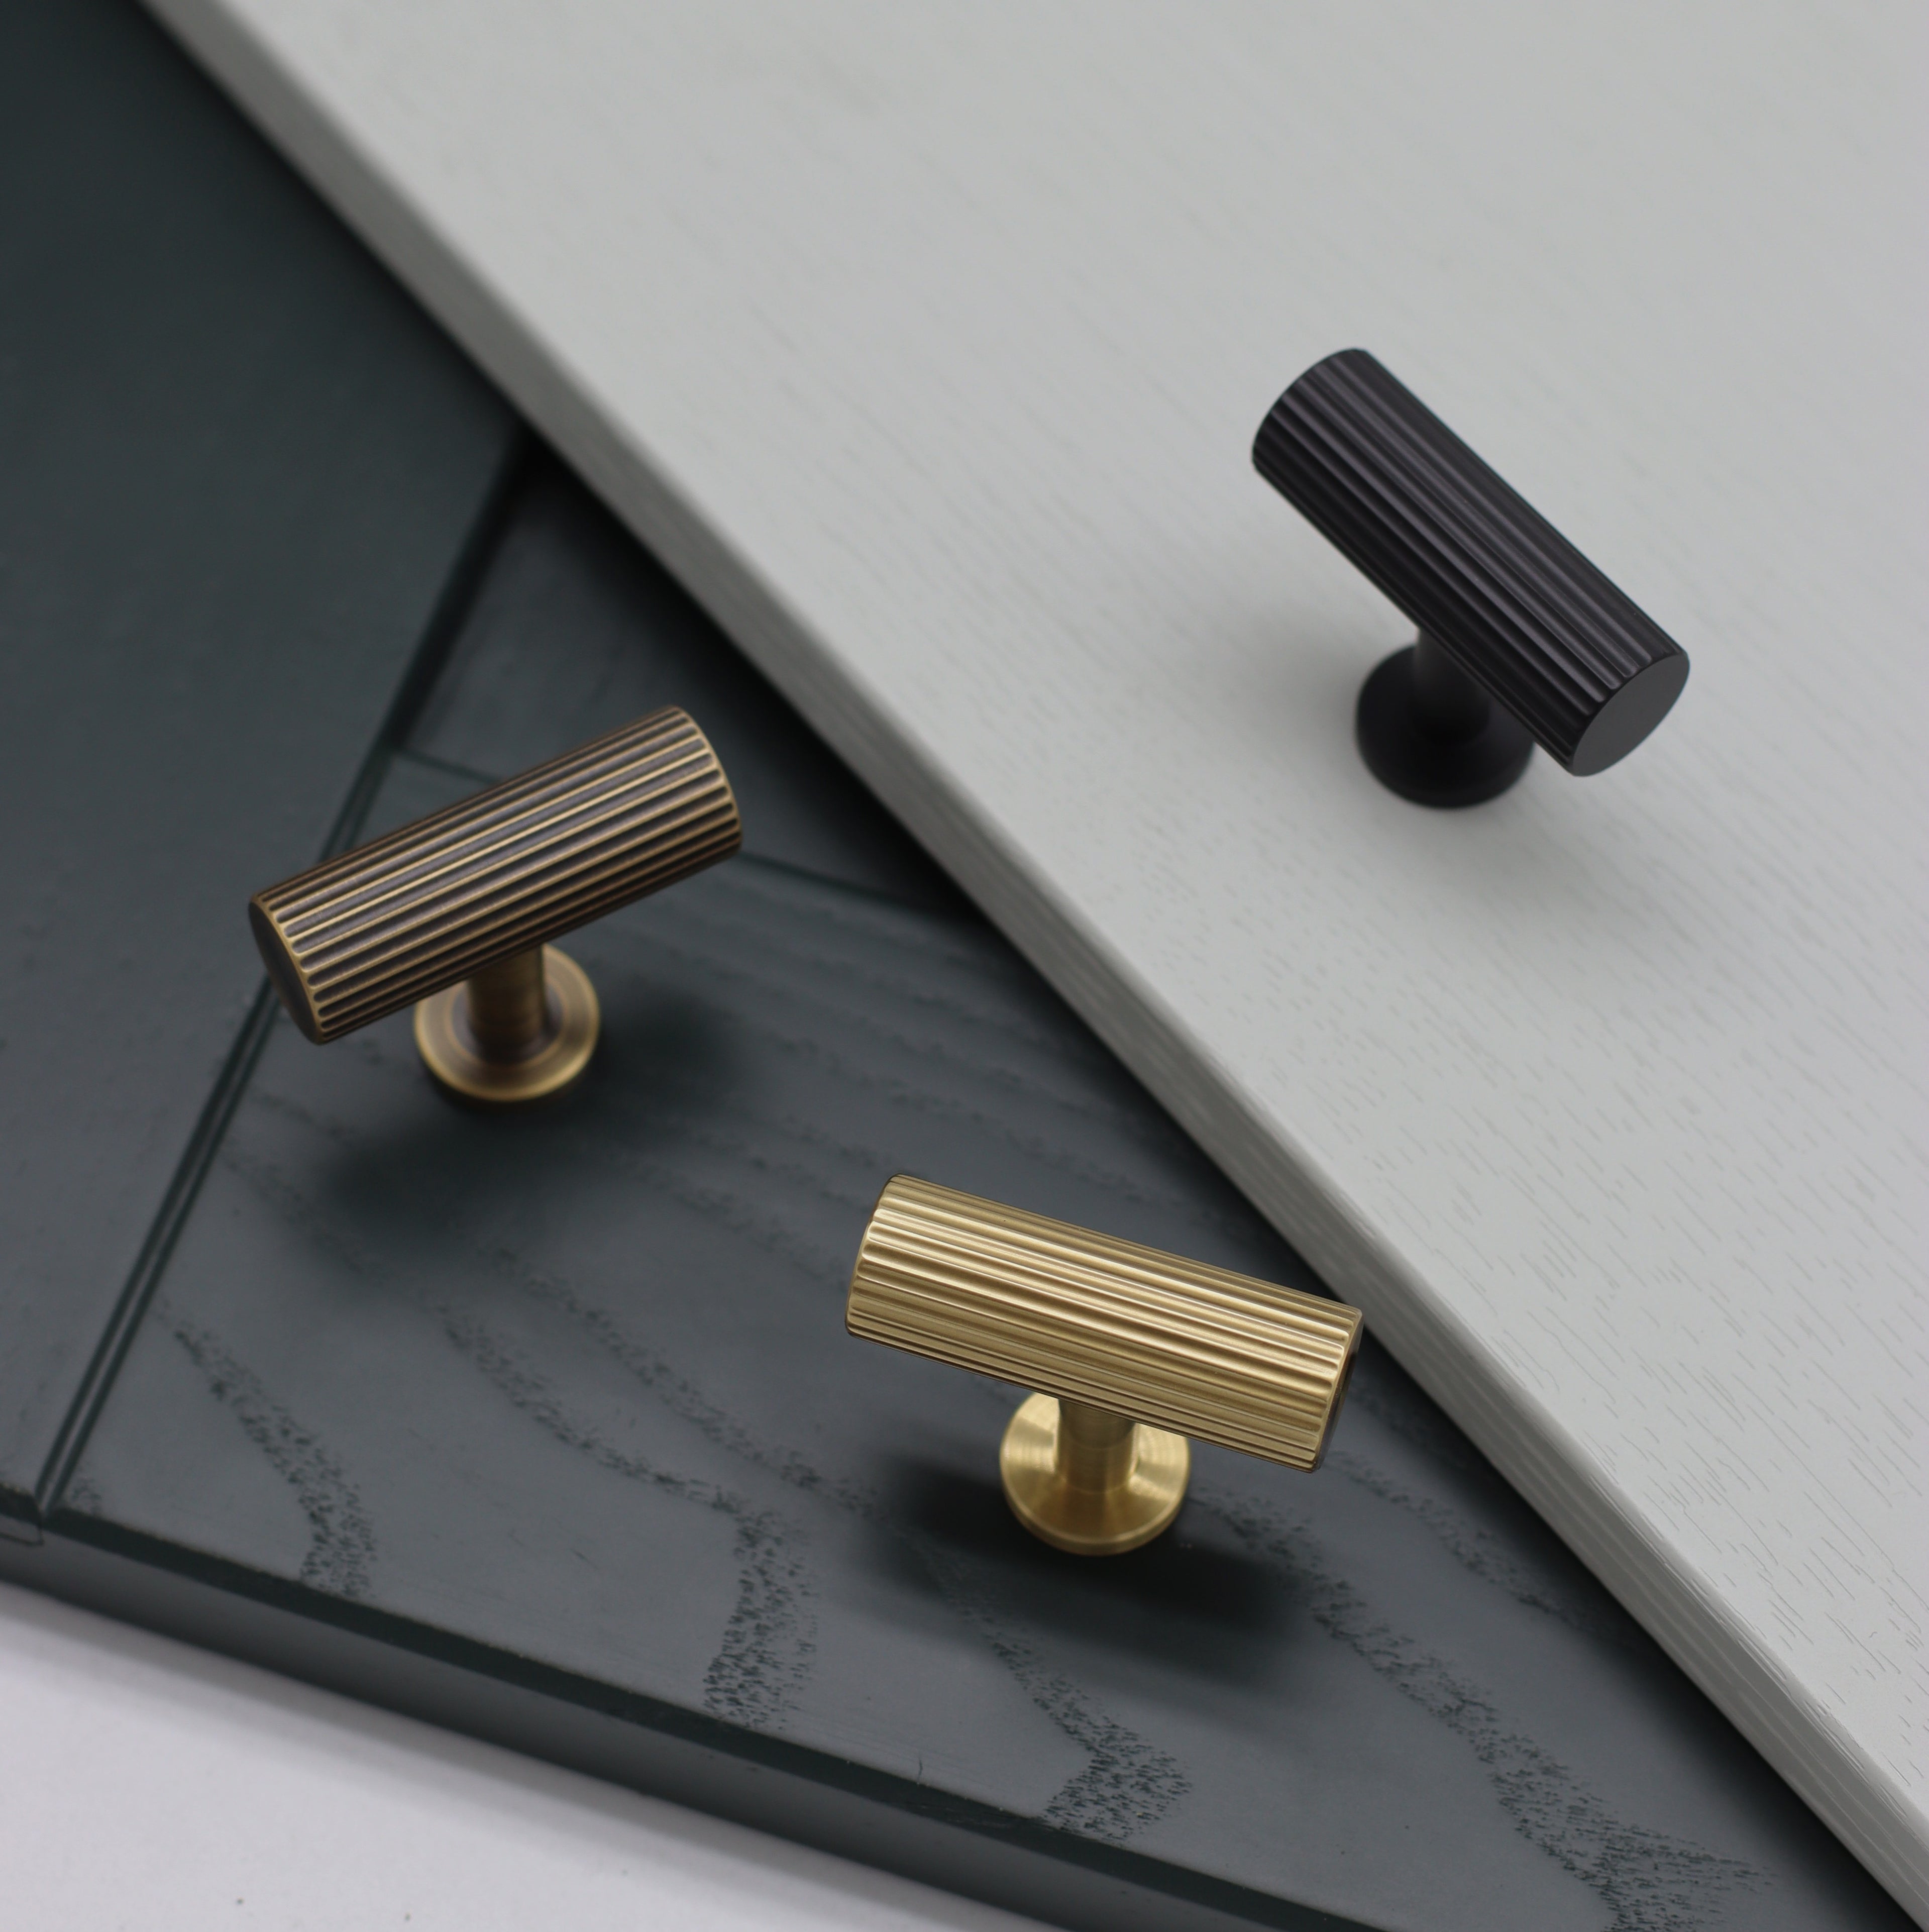 callington t-bar cabinetry pull handles in lacquered satin brass, classic antique bronze and timeless cerakote ceramic black. photography georgie commons freelance - kent 